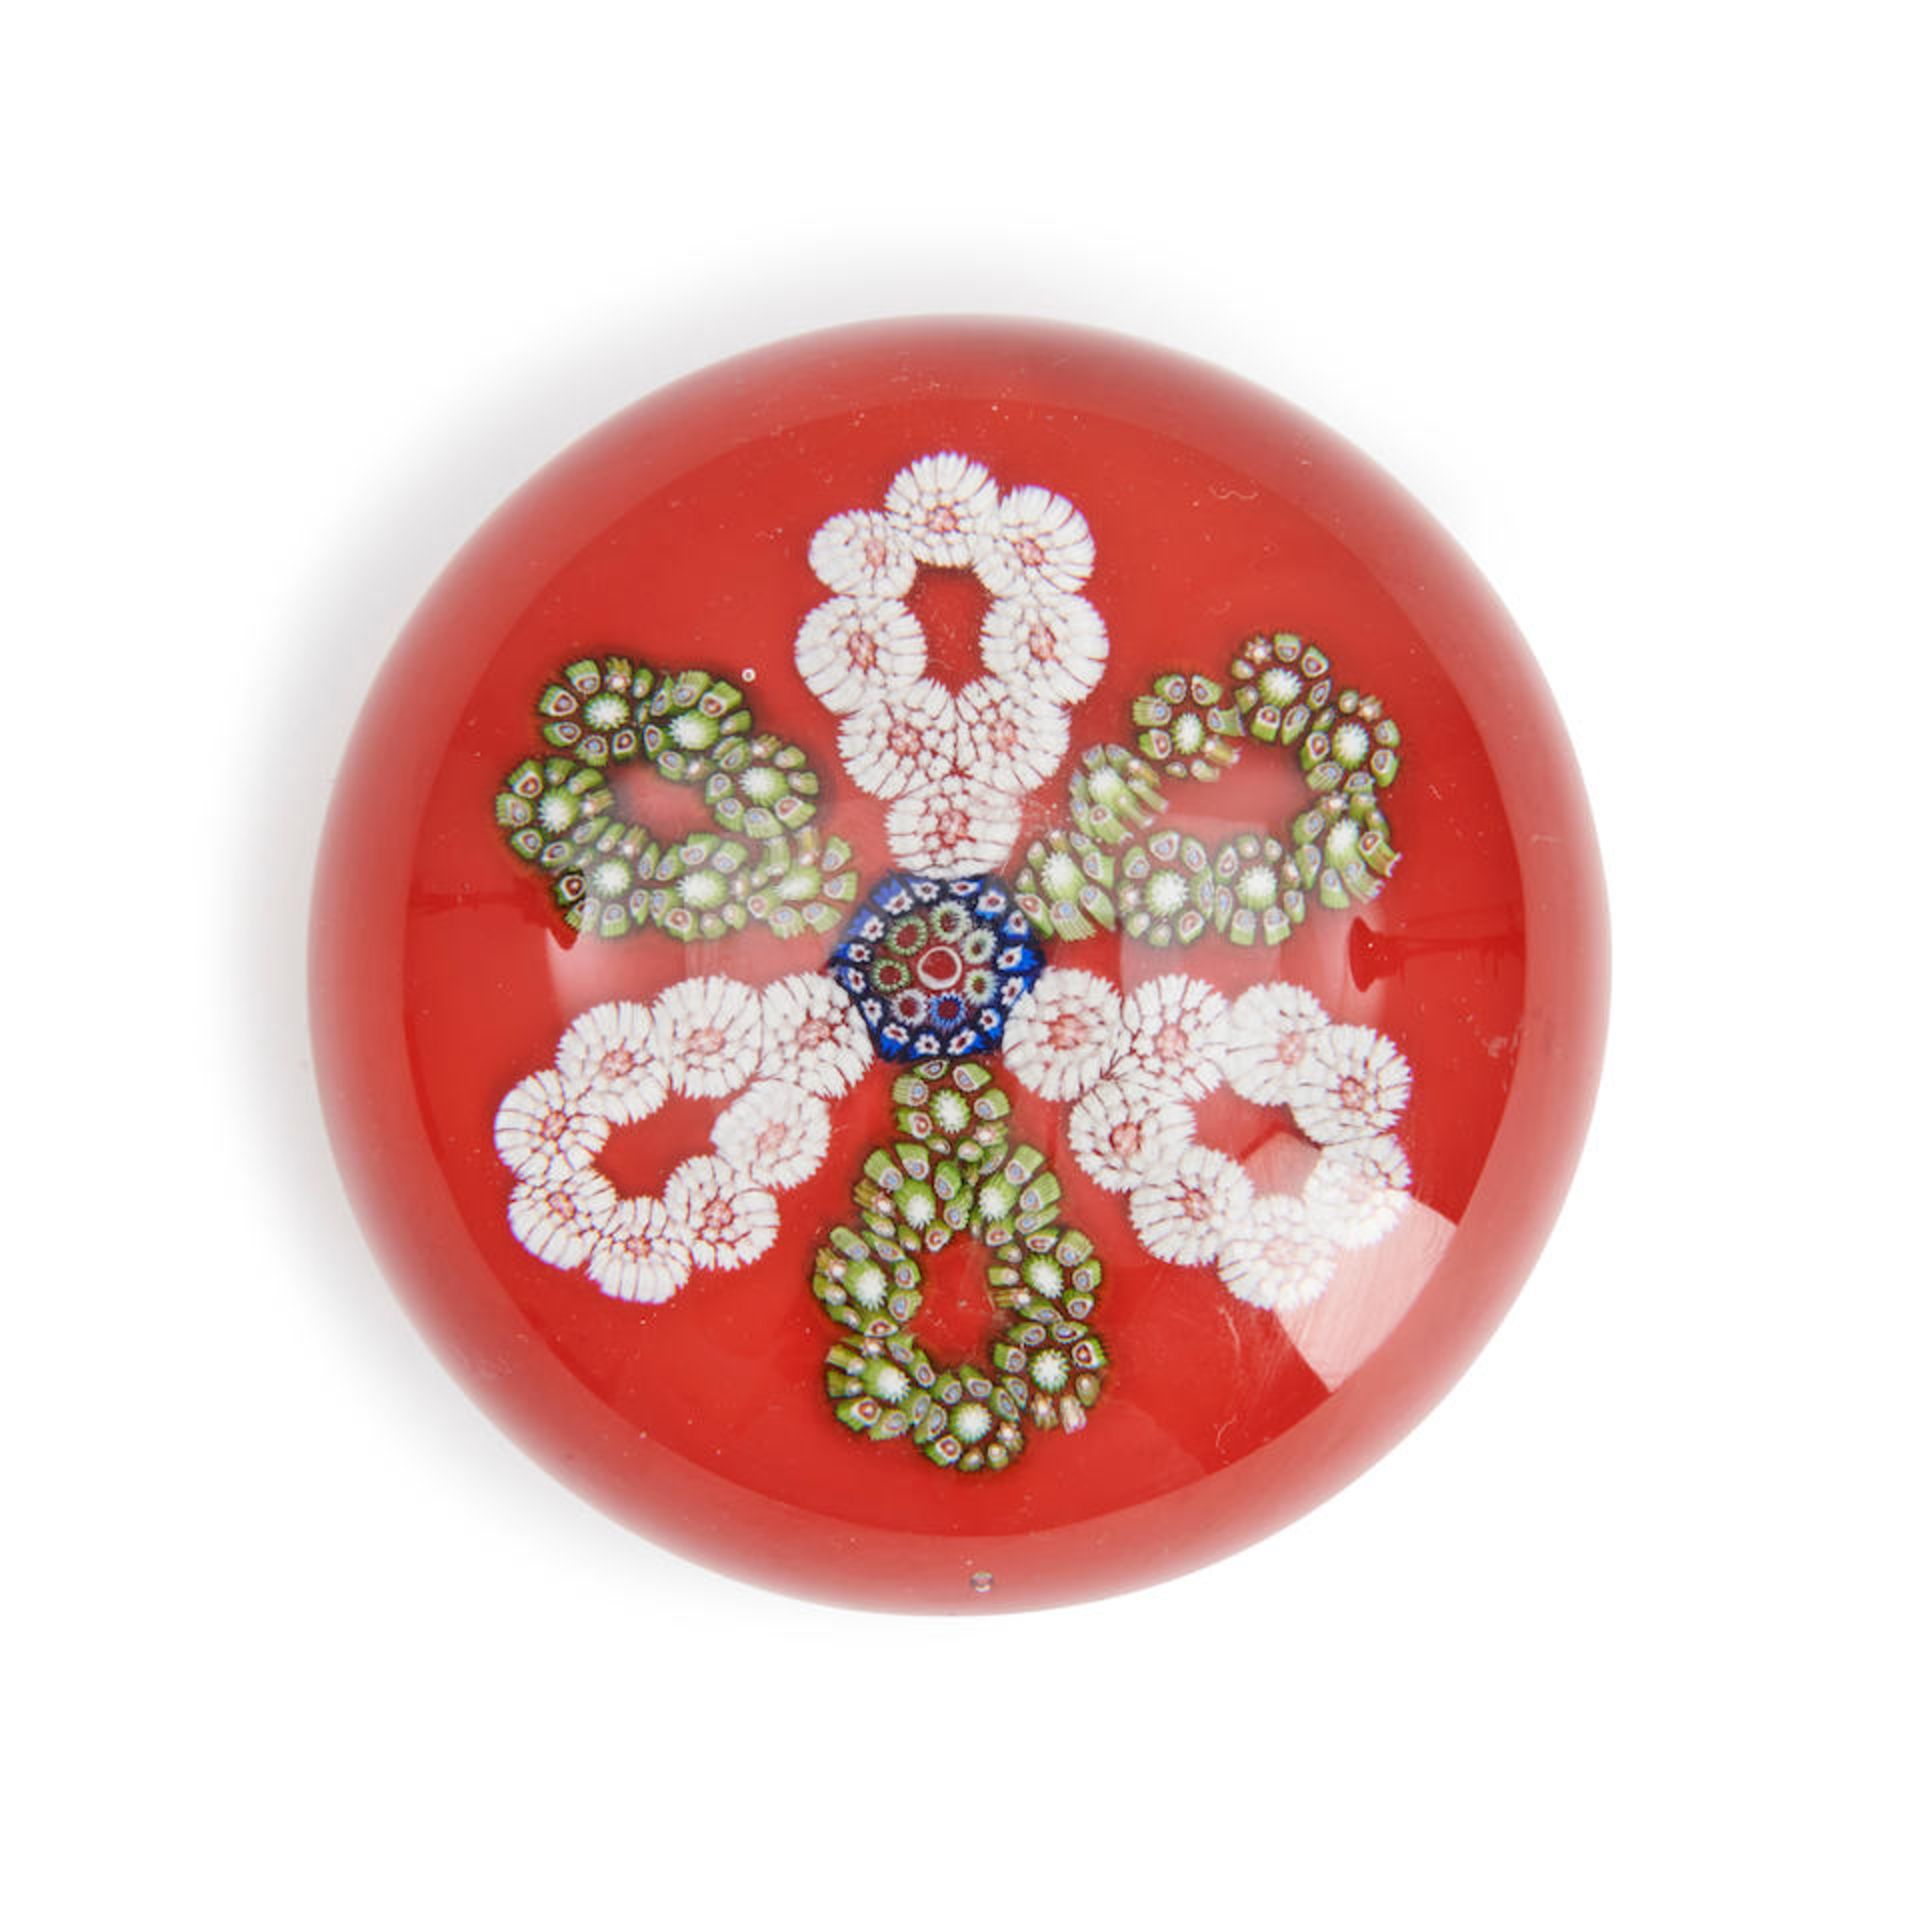 FRENCH GLASS PAPERWEIGHT WITH MILLEFIORI GARLANDS ON RED GROUND, ht. 1 3/4, dia. 2 7/8 in.